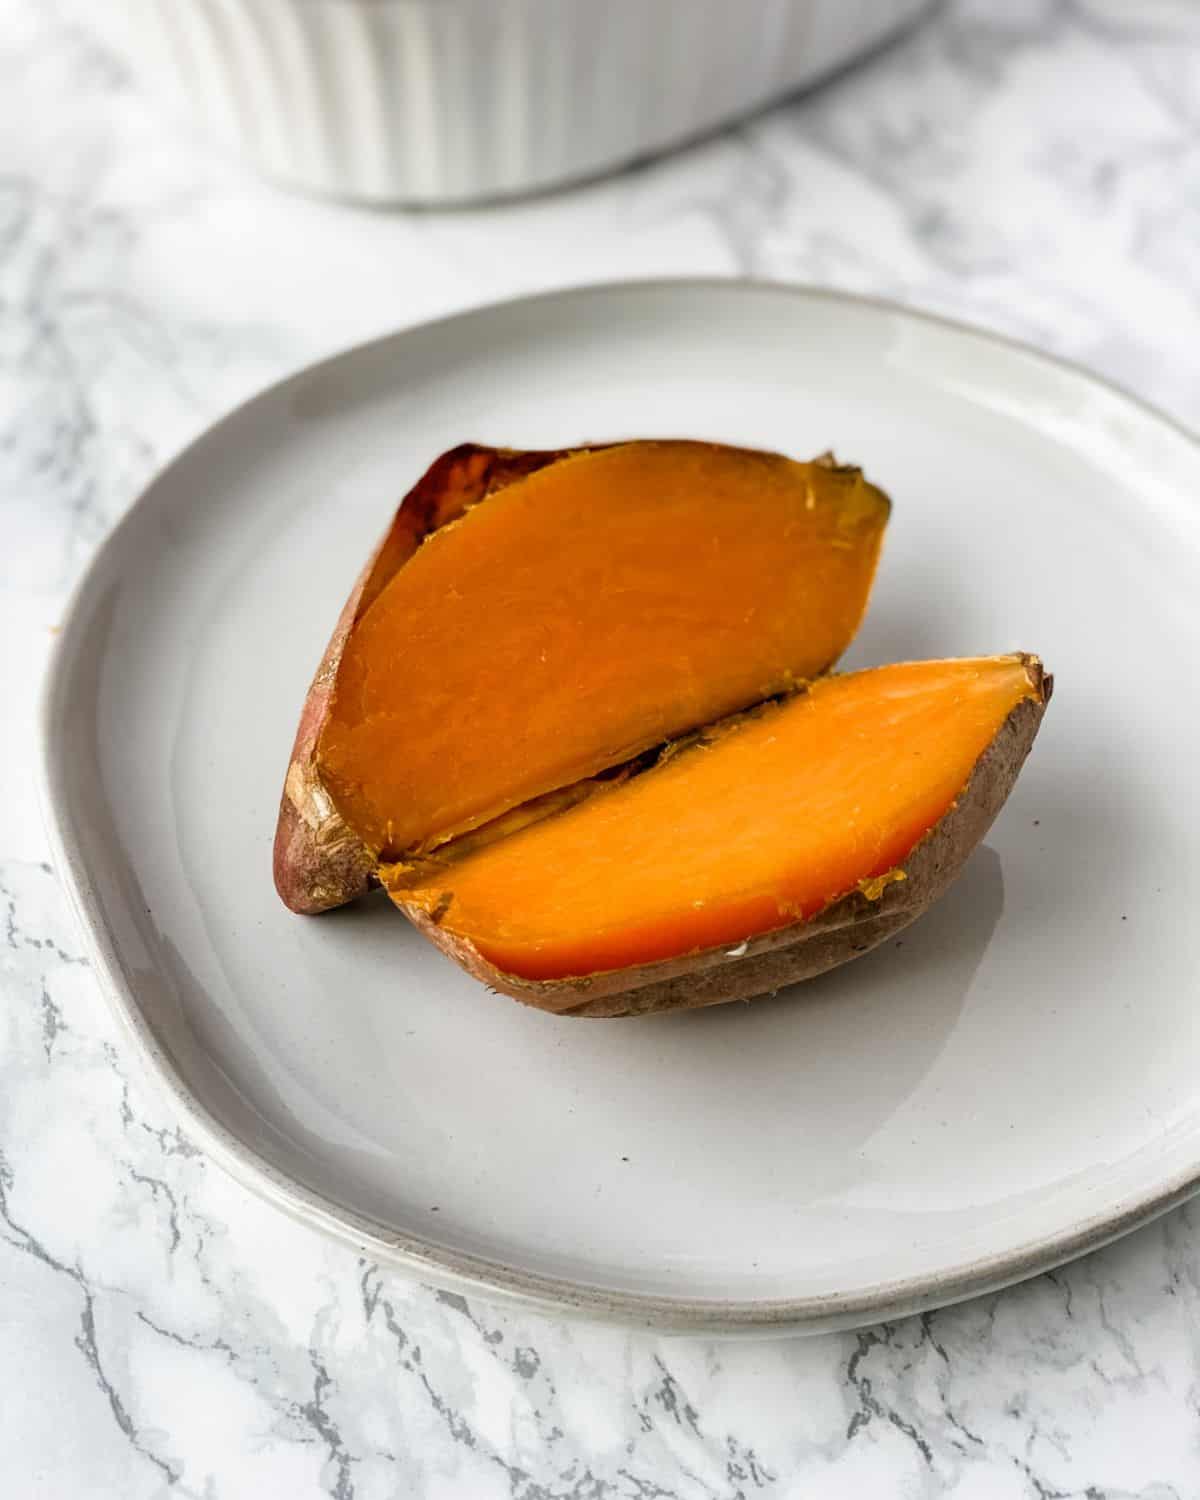 cooked sweet potatoes on a plate.